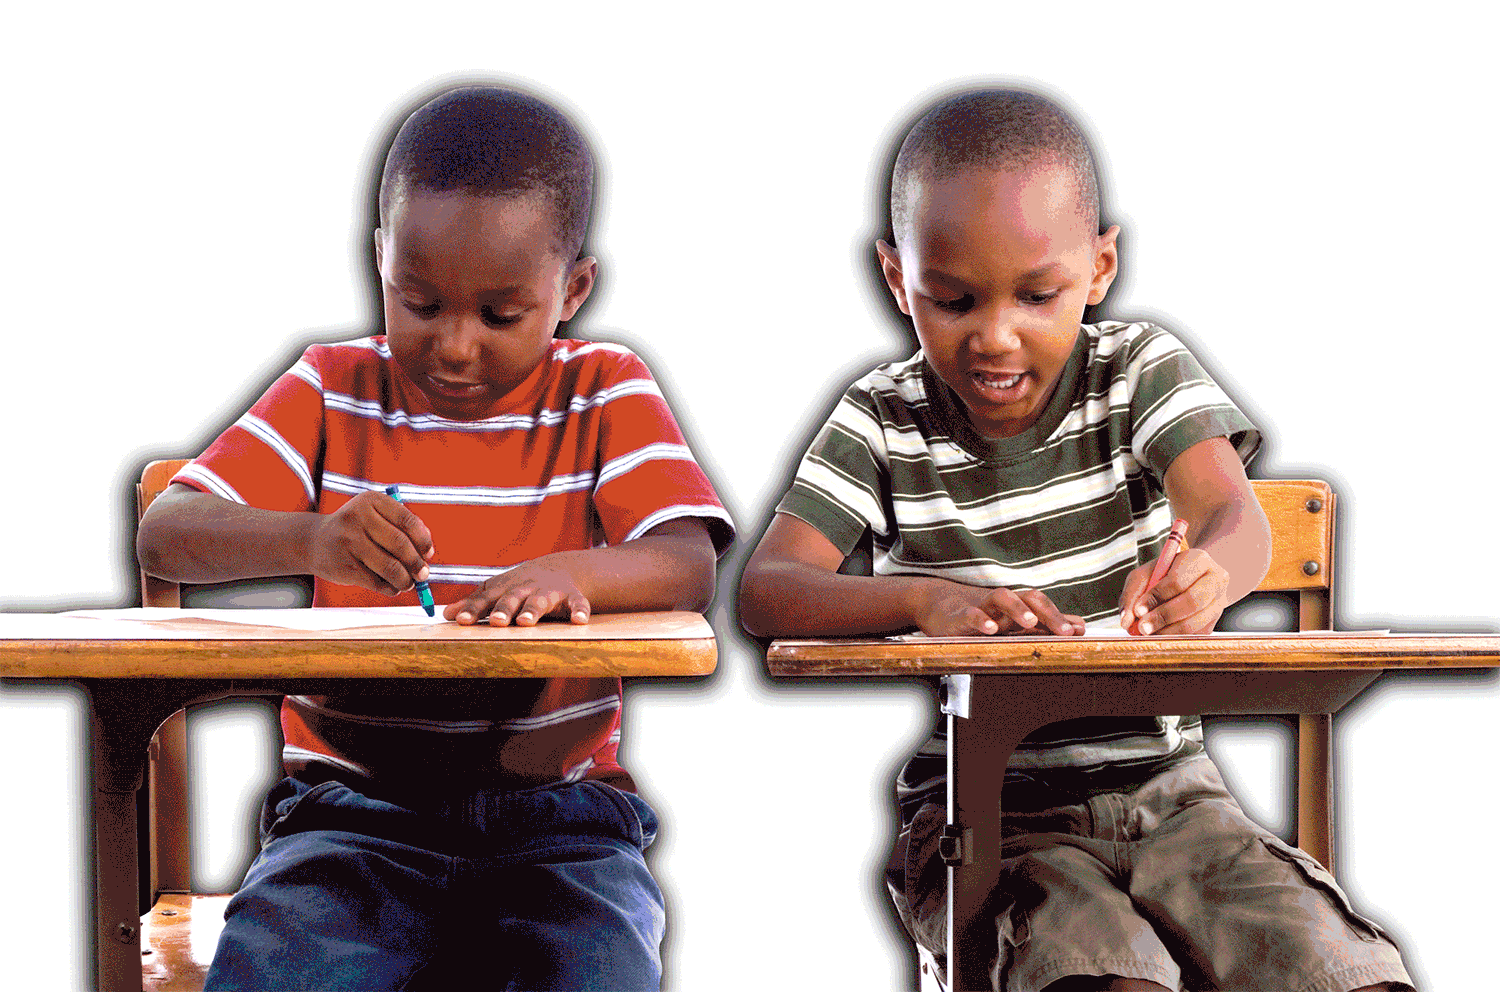 Two boys color at desks while many large crayons appear behind them.